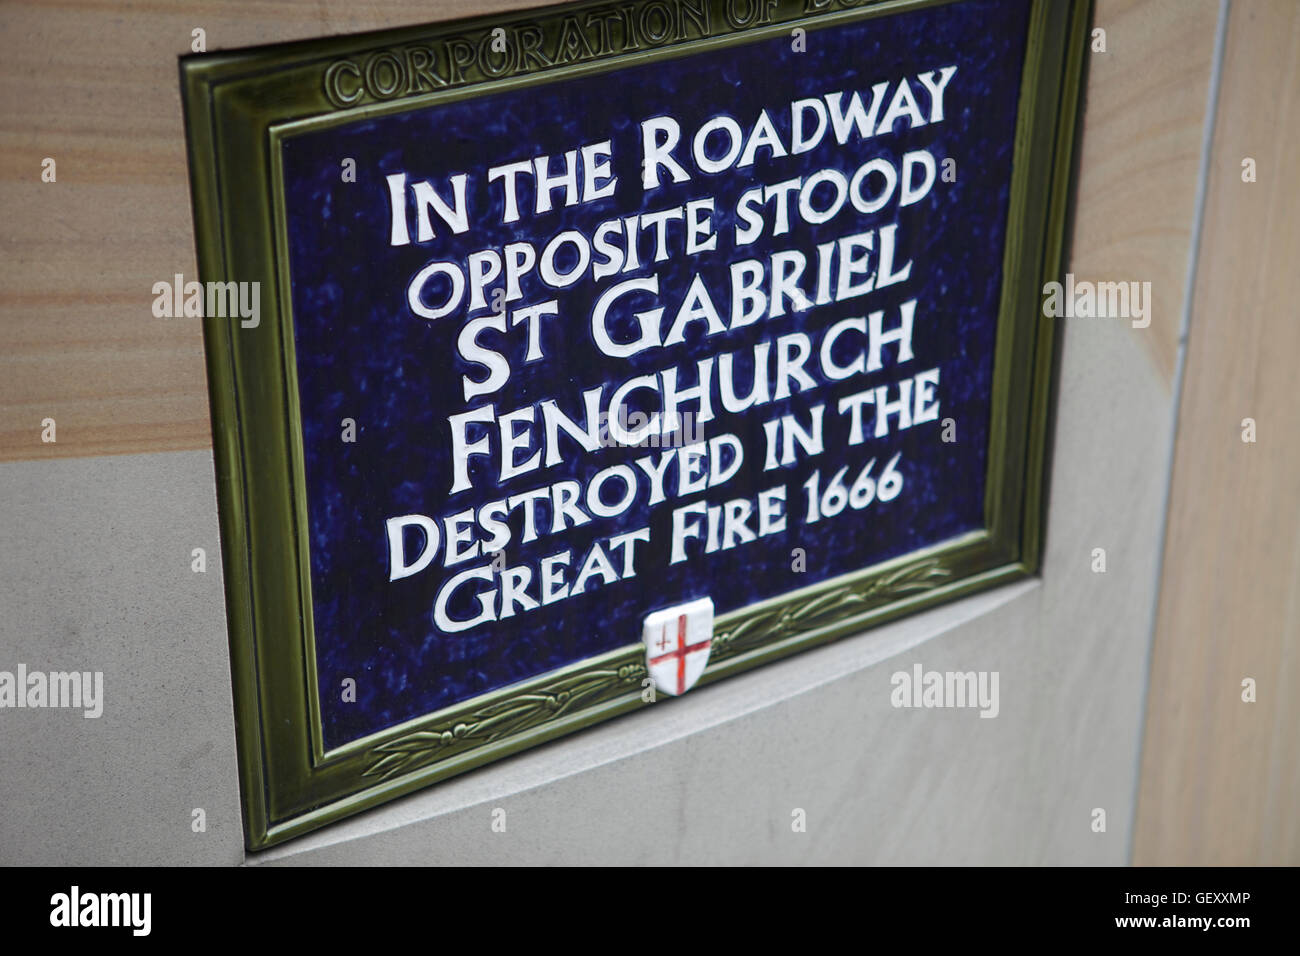 Plaque to St Gabriel Fenchurch which was destroyed in the Great Fire of London in 1666. Stock Photo